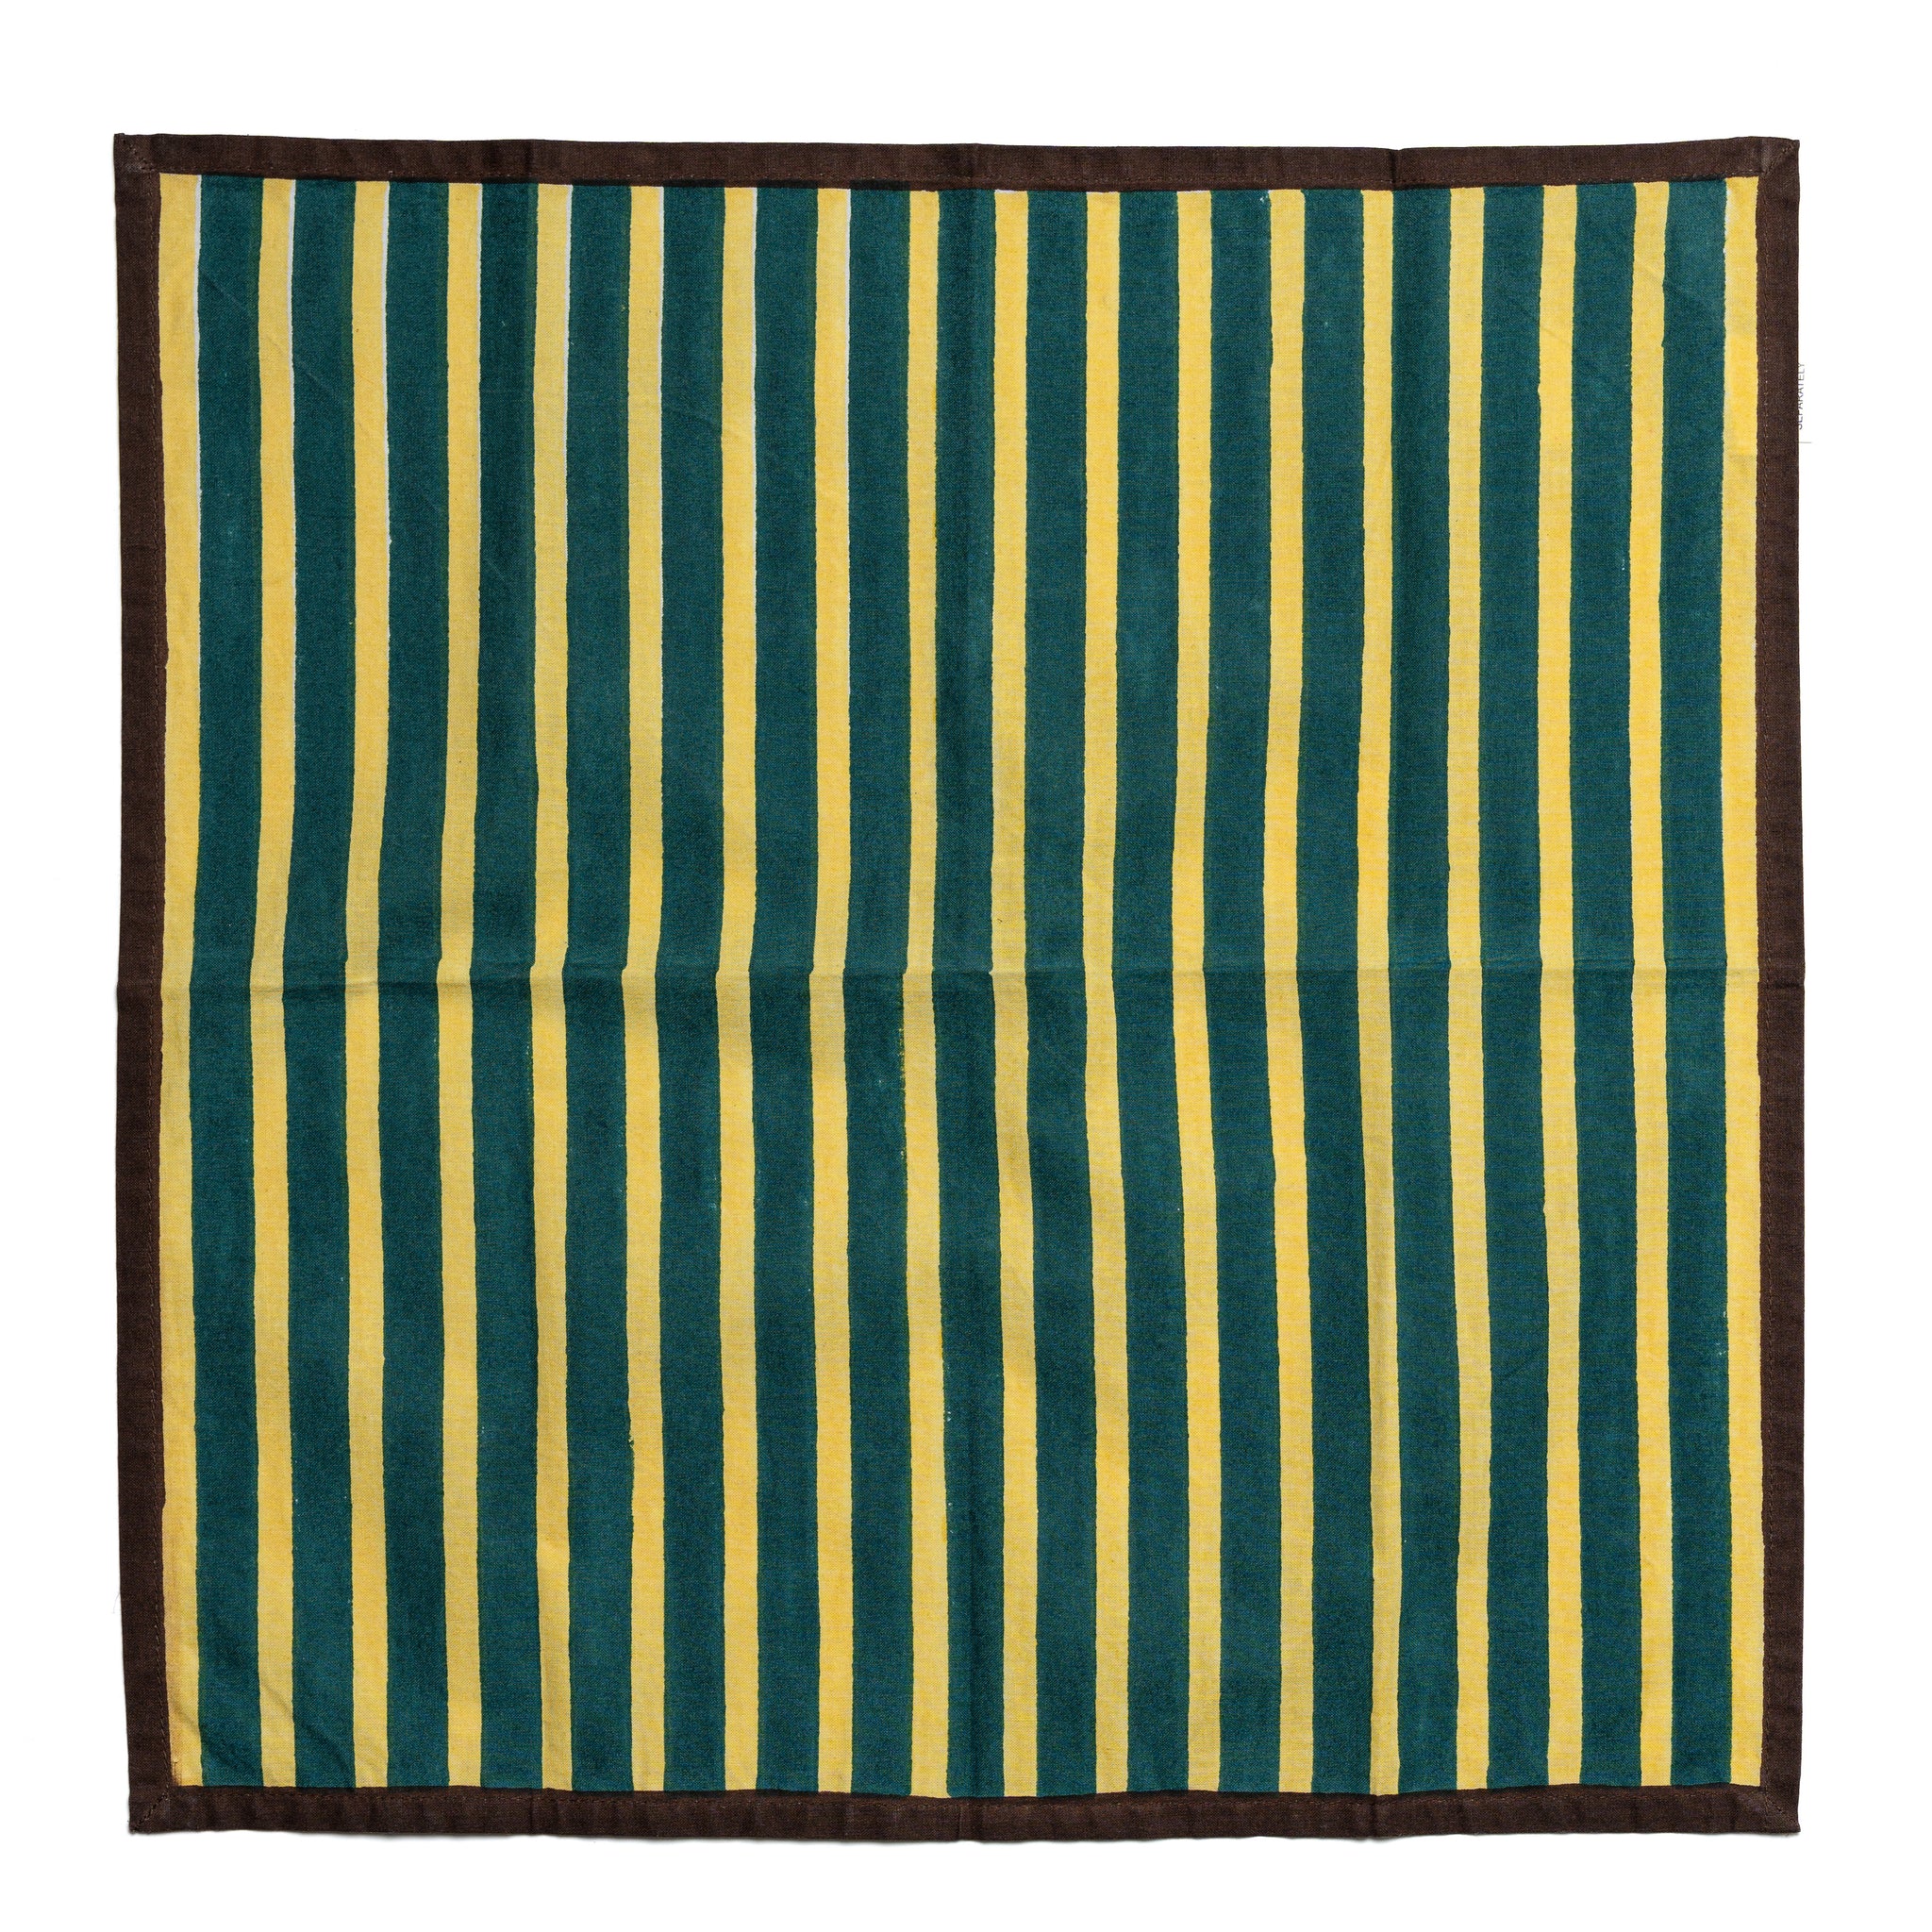 Block stripe napkins set of two - yellow and green